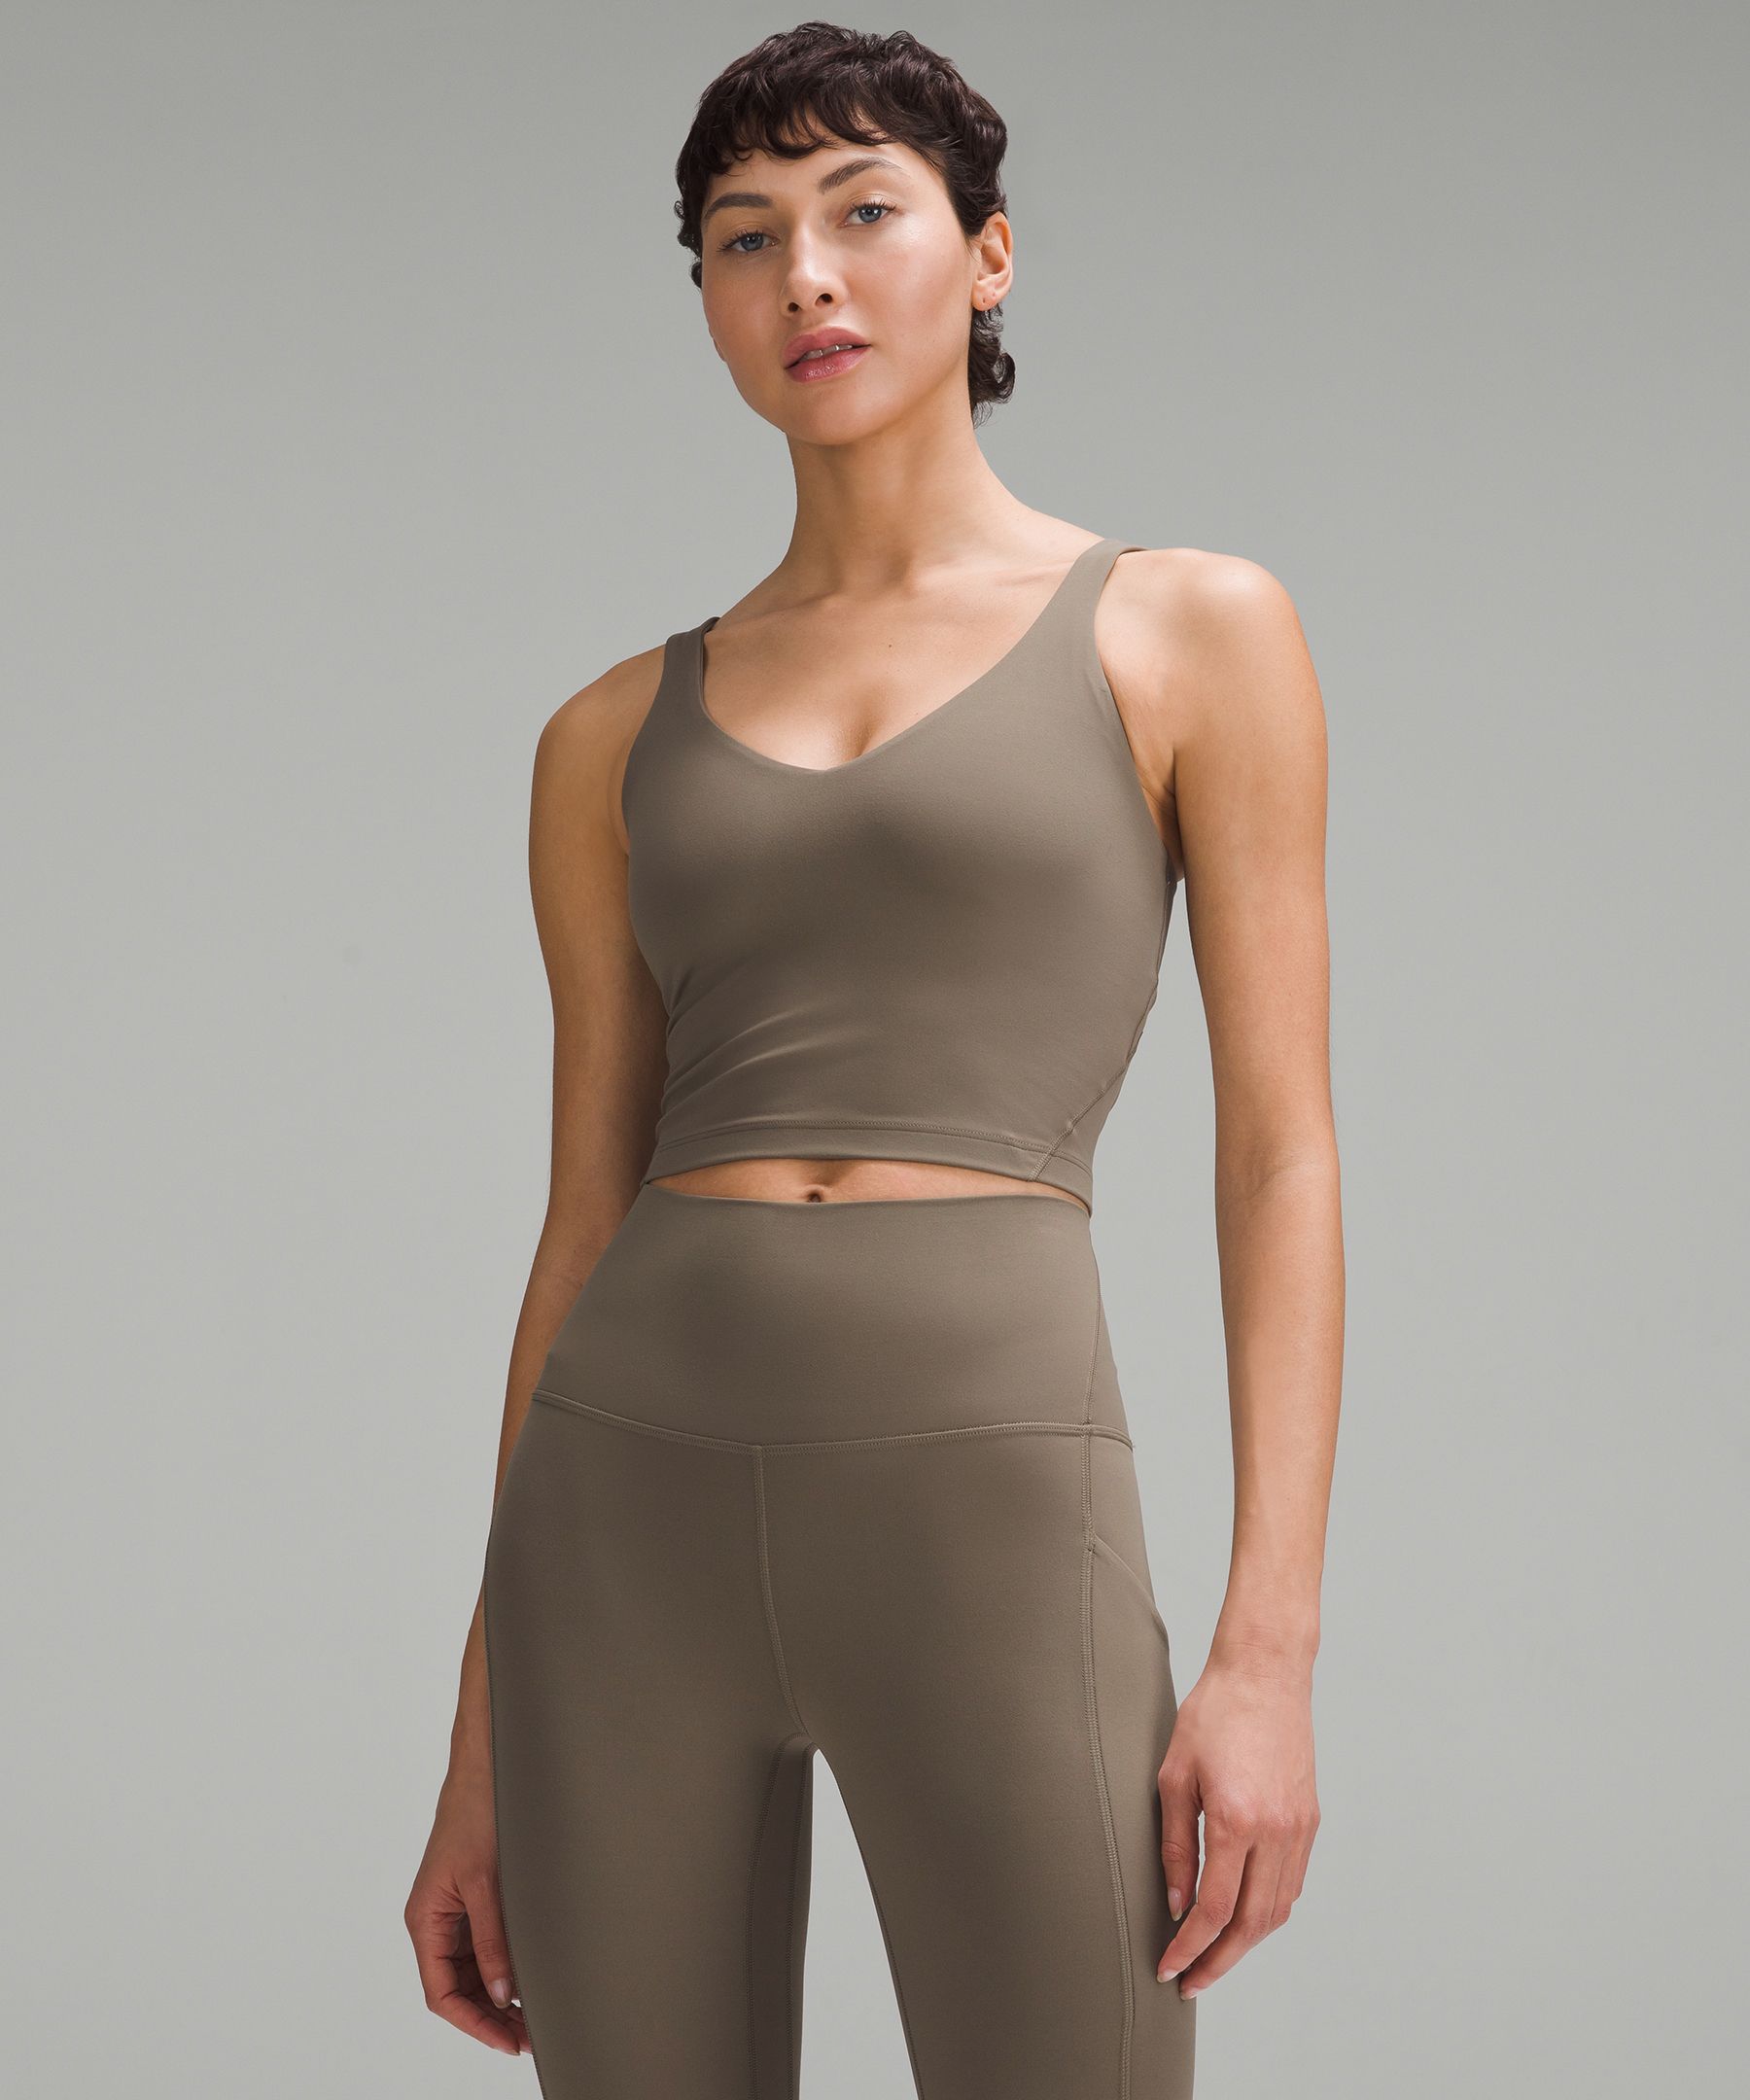 Align tank in submarine paired with Black WU's on Asian Warm(?) skin tone!  : r/lululemon